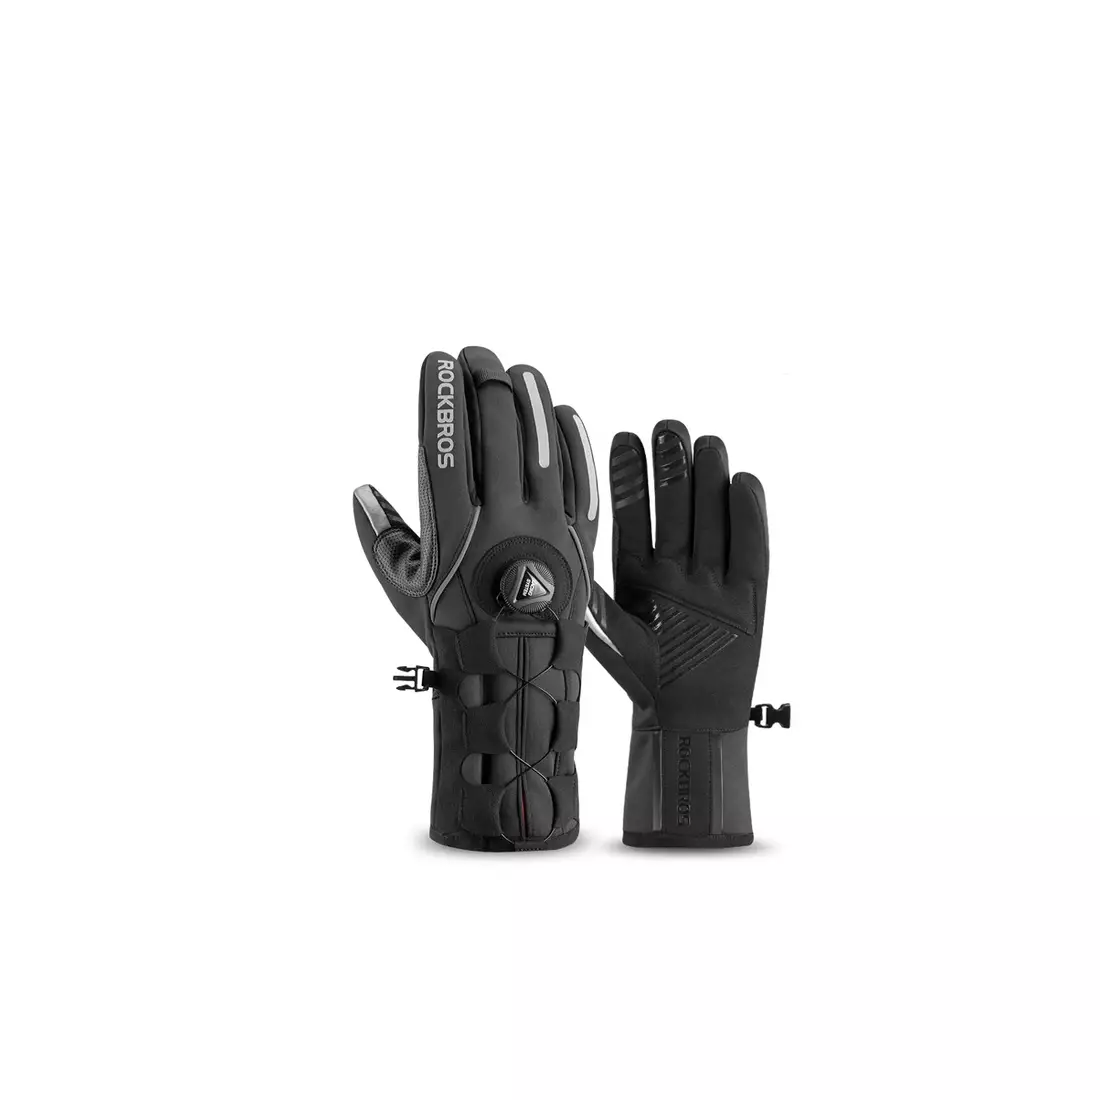 Rockbros winter cycling gloves softshell with adjustment, black S212BK